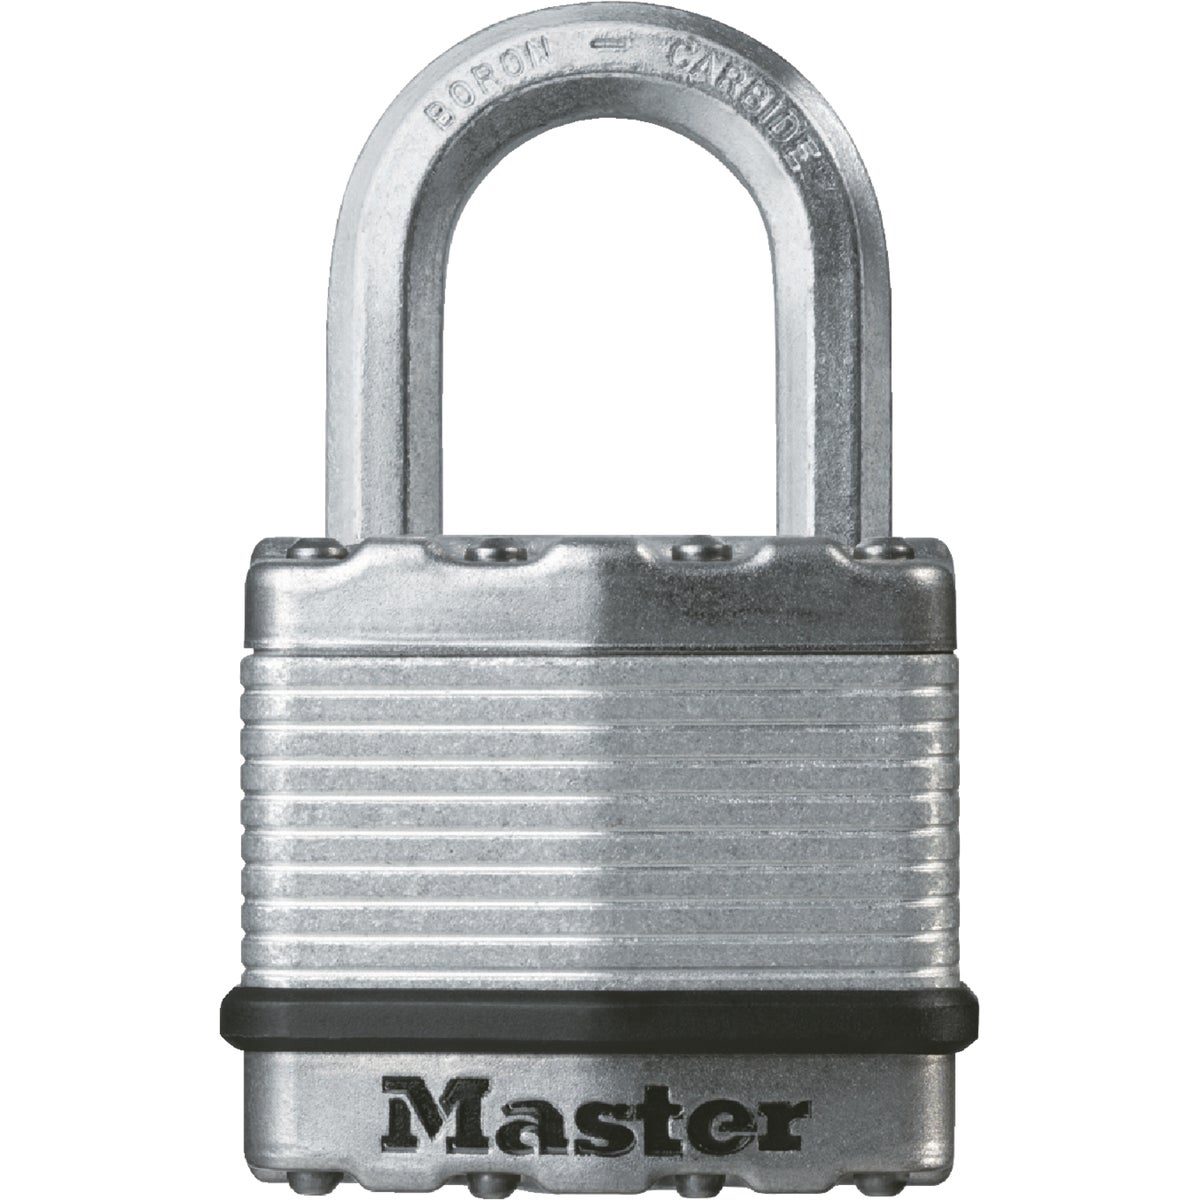 Master Lock Magnum 1-3/4 In. W. Dual-Armor Keyed Alike Padlock with 1 In. L. Shackle